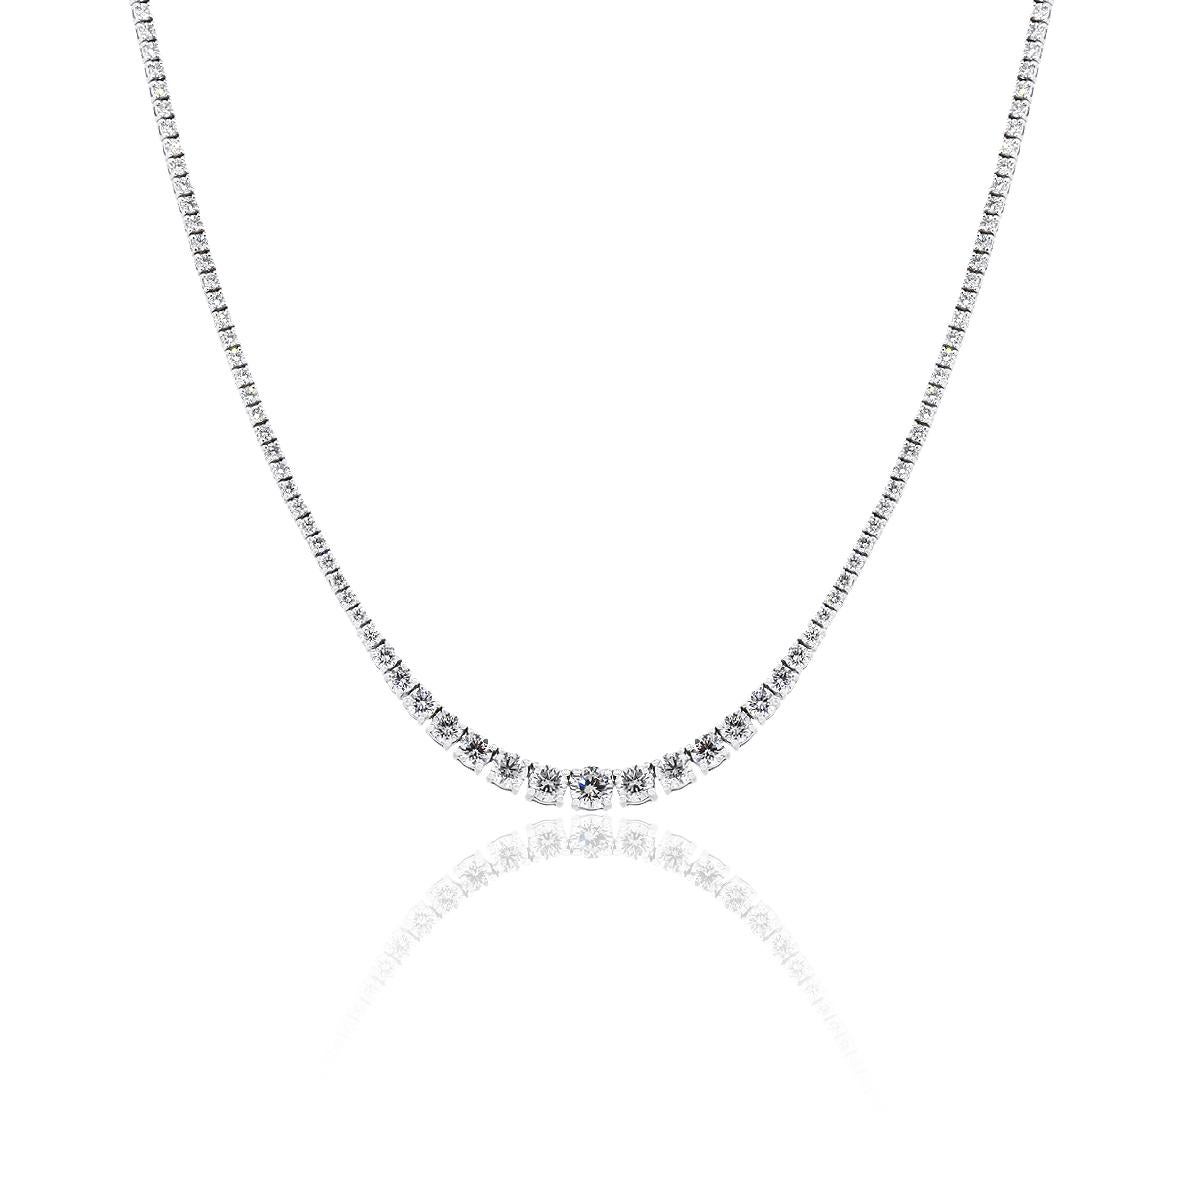 Material: 18k white gold
Diamond Details: Approximately 7.06ctw of graduated round brilliant diamonds. Diamonds are G/H in color and VS in clarity
Measurements: Necklace measures 16″ in length
Clasp: Tongue in box with safety clasp
Total Item